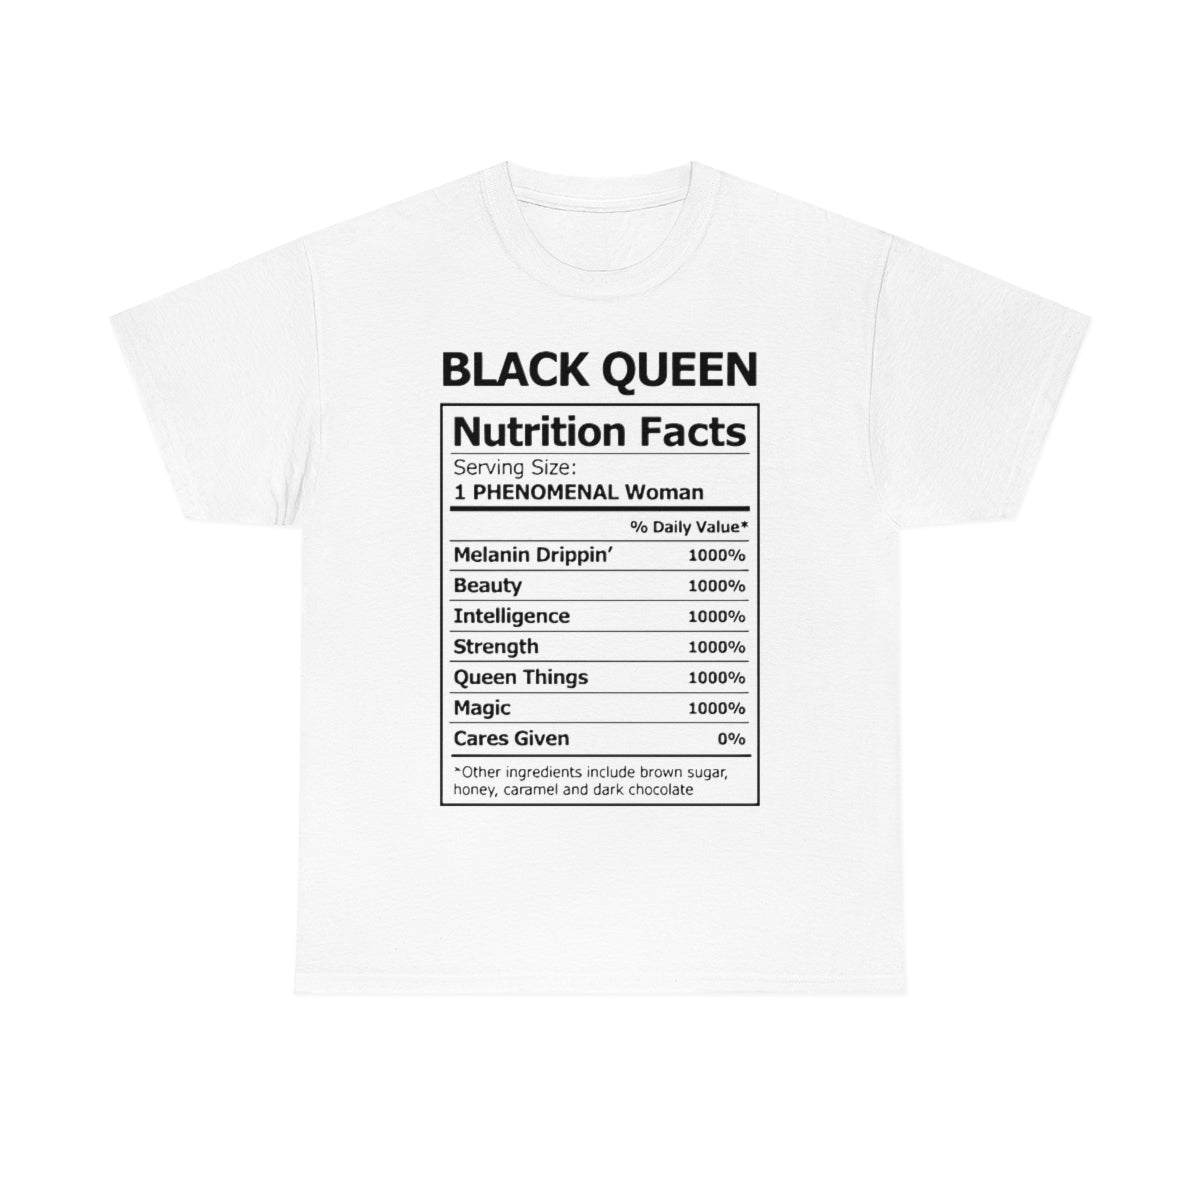 "Black Queen Nutrition Facts" T-Shirt (Available in Stone Gray)